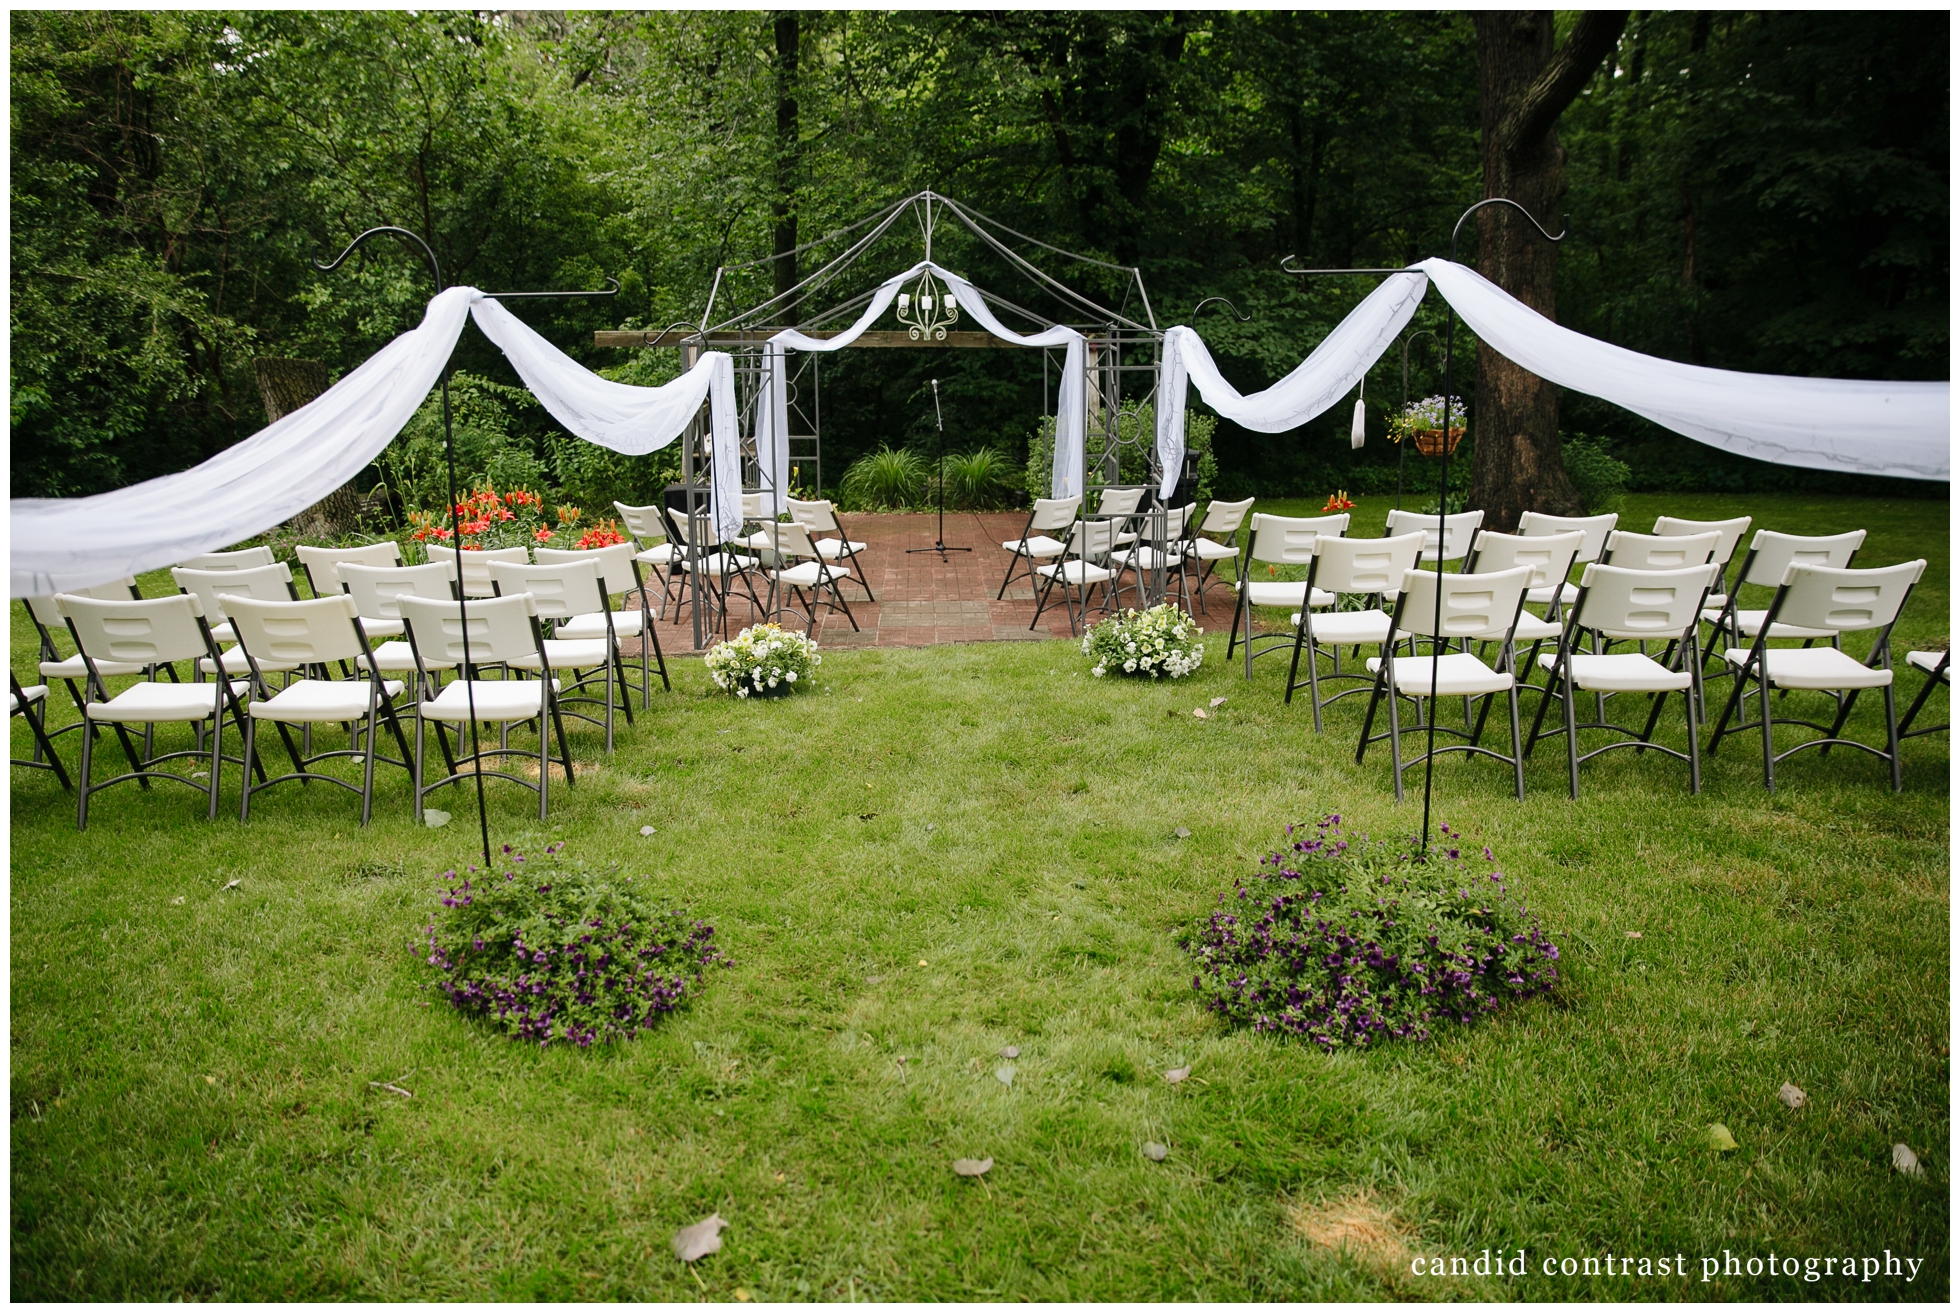 outdoor ceremony setup at backyard wedding in dubuque, ia, candid contrast photography